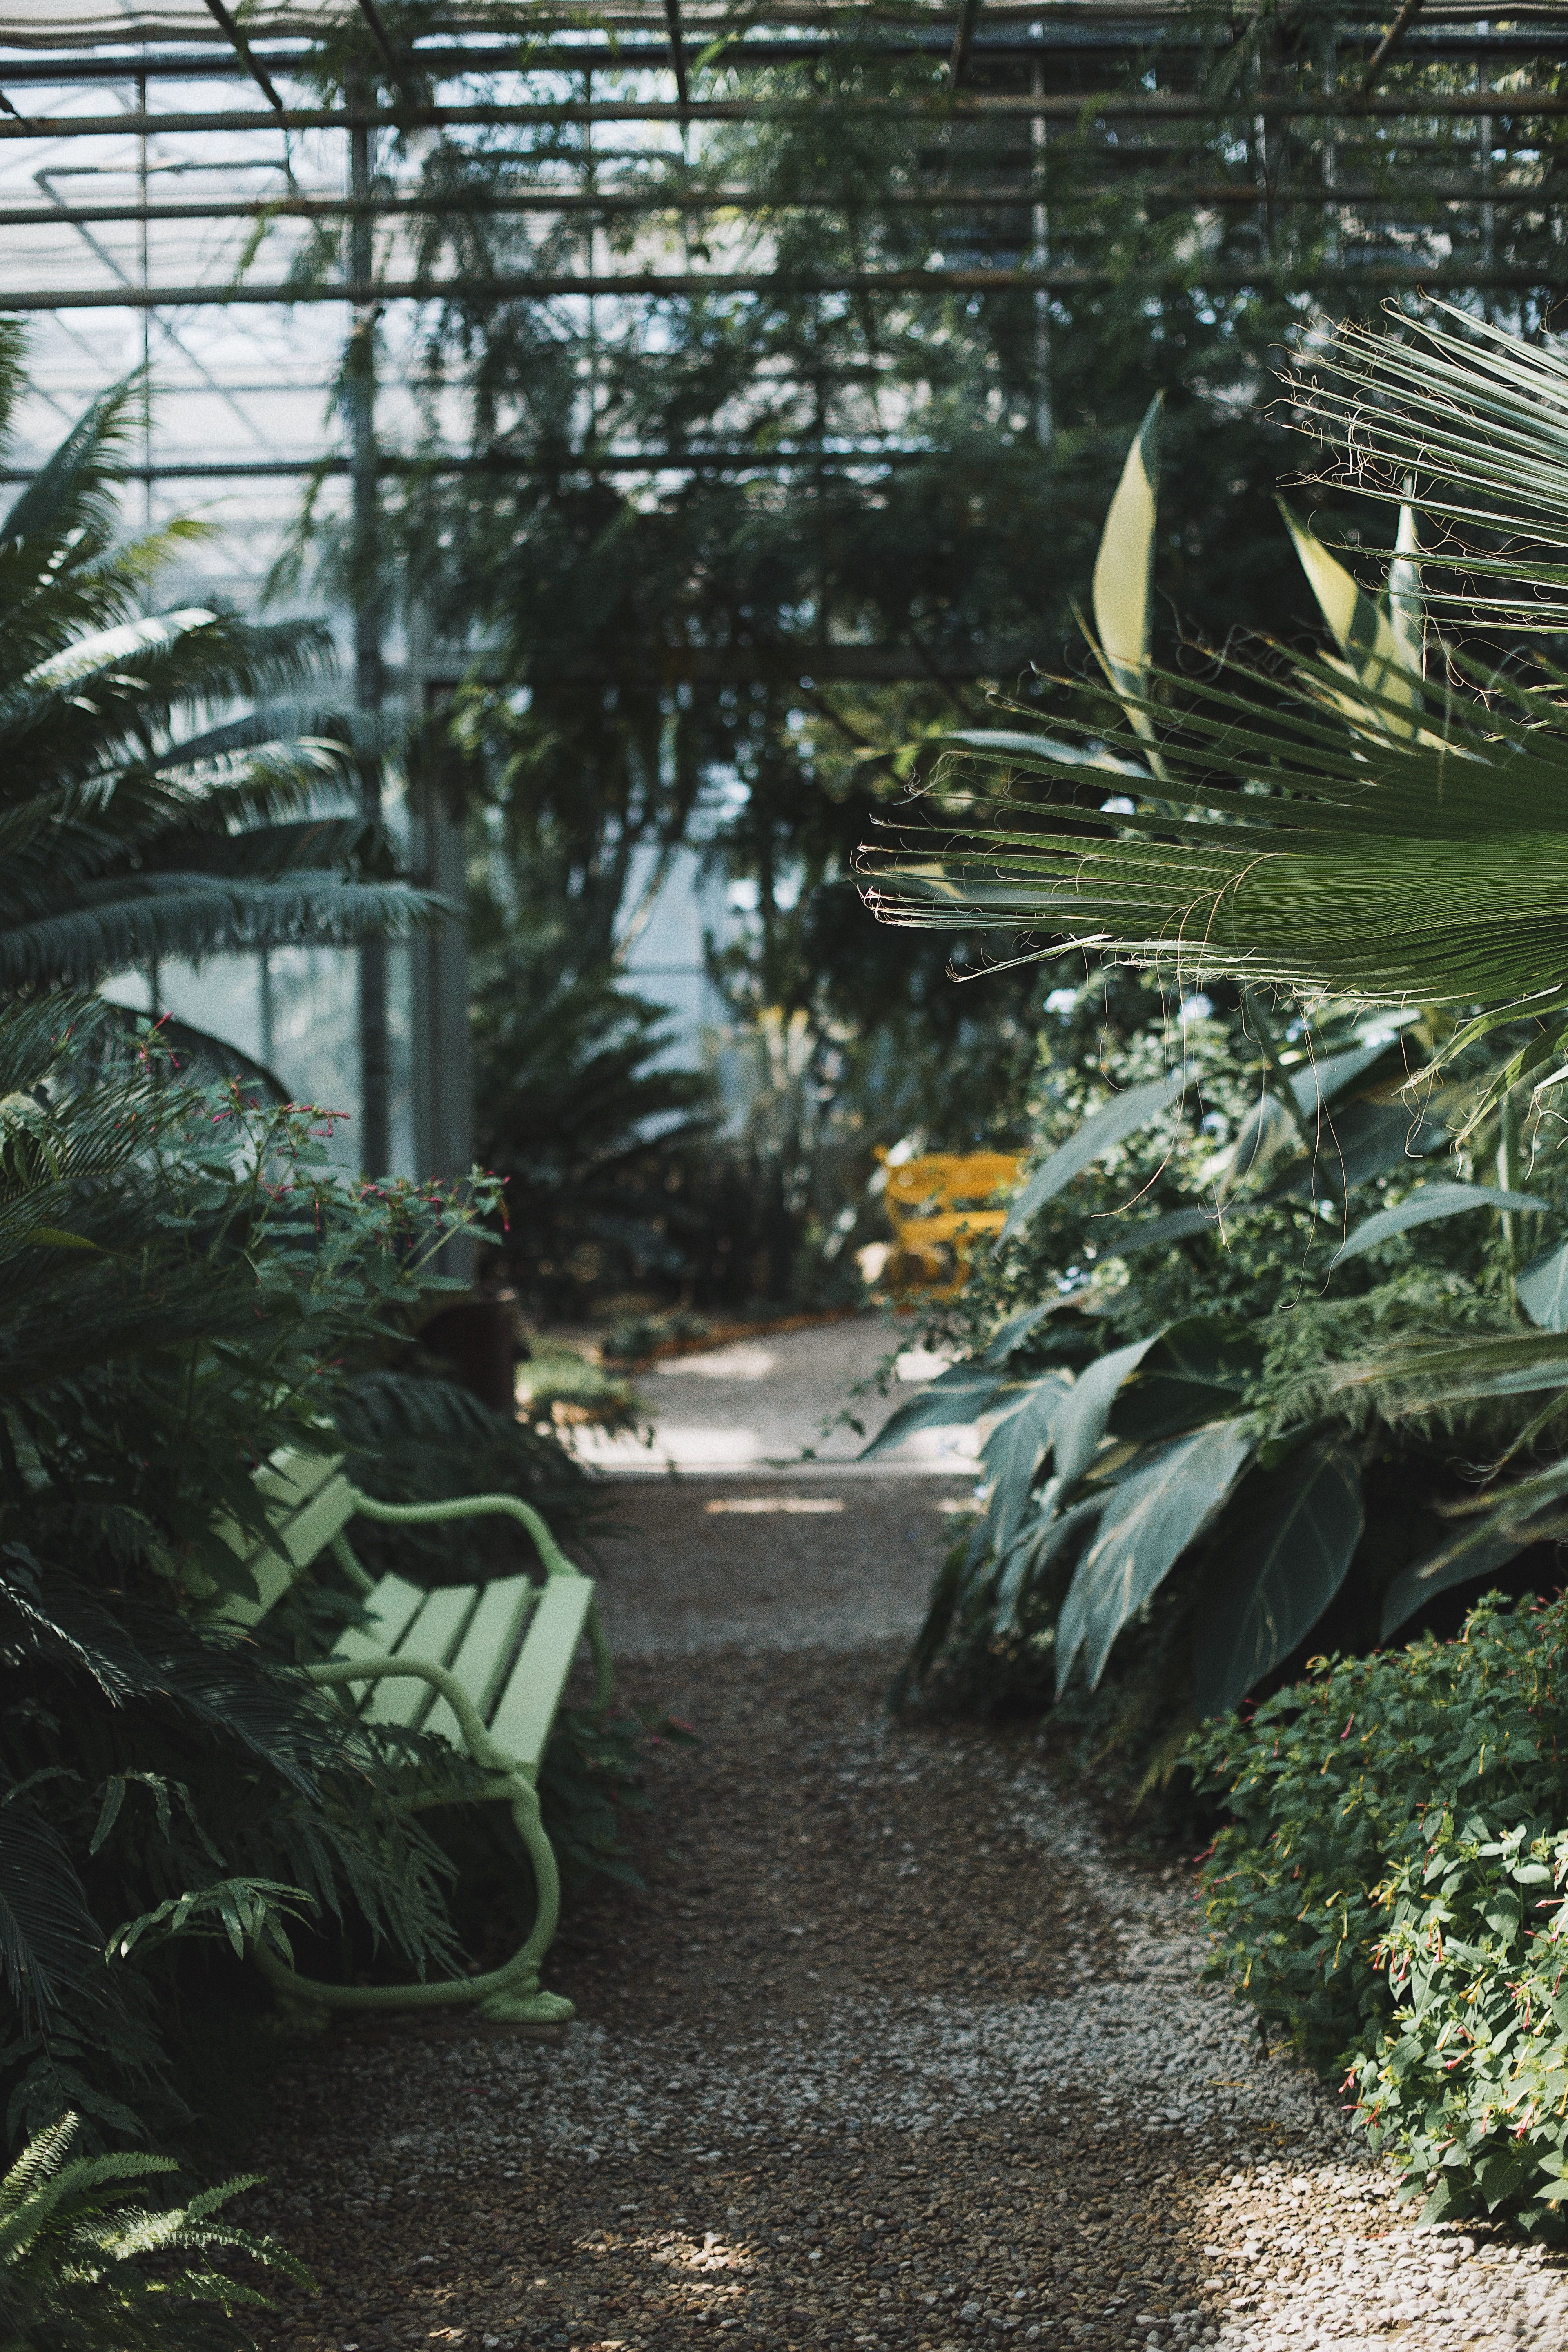 A bench surrounded by plants in a greenhouse. - Botanical